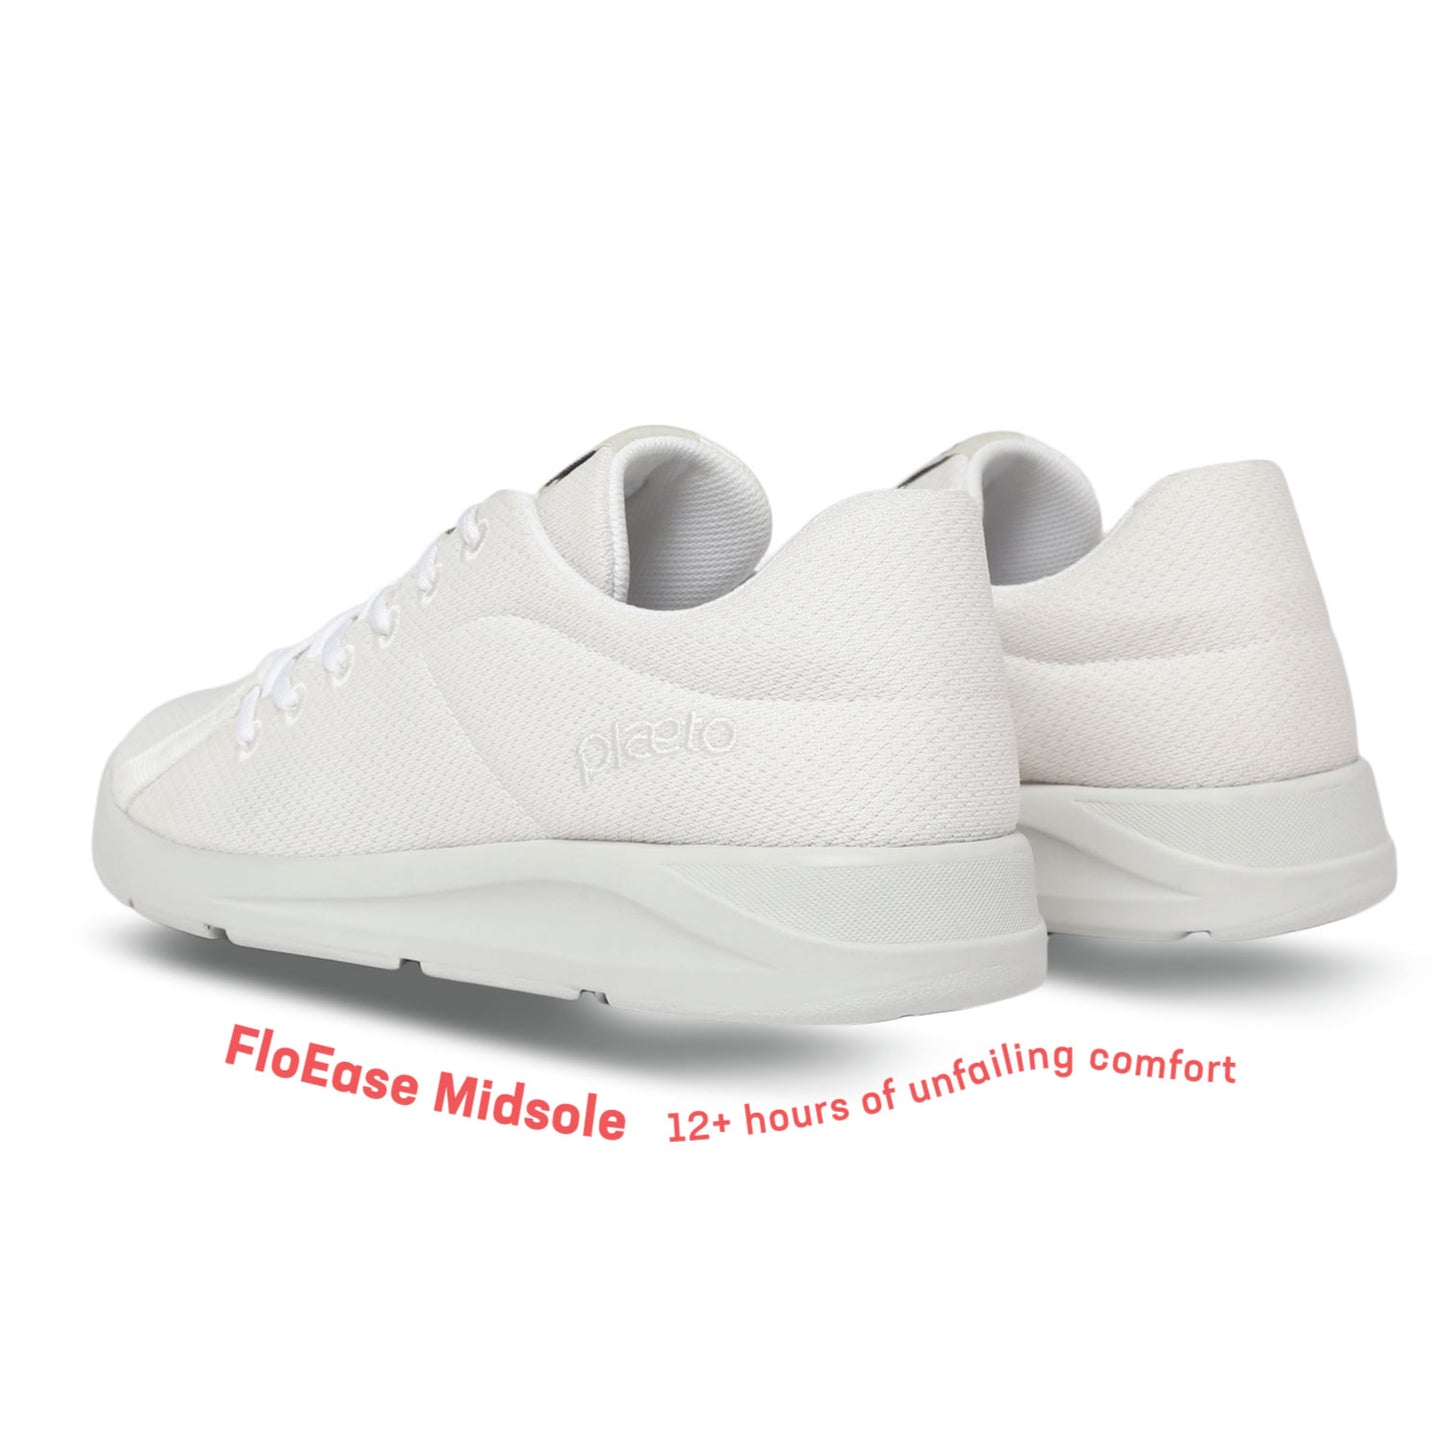 Classic Men's Multiplay Sneakers - White